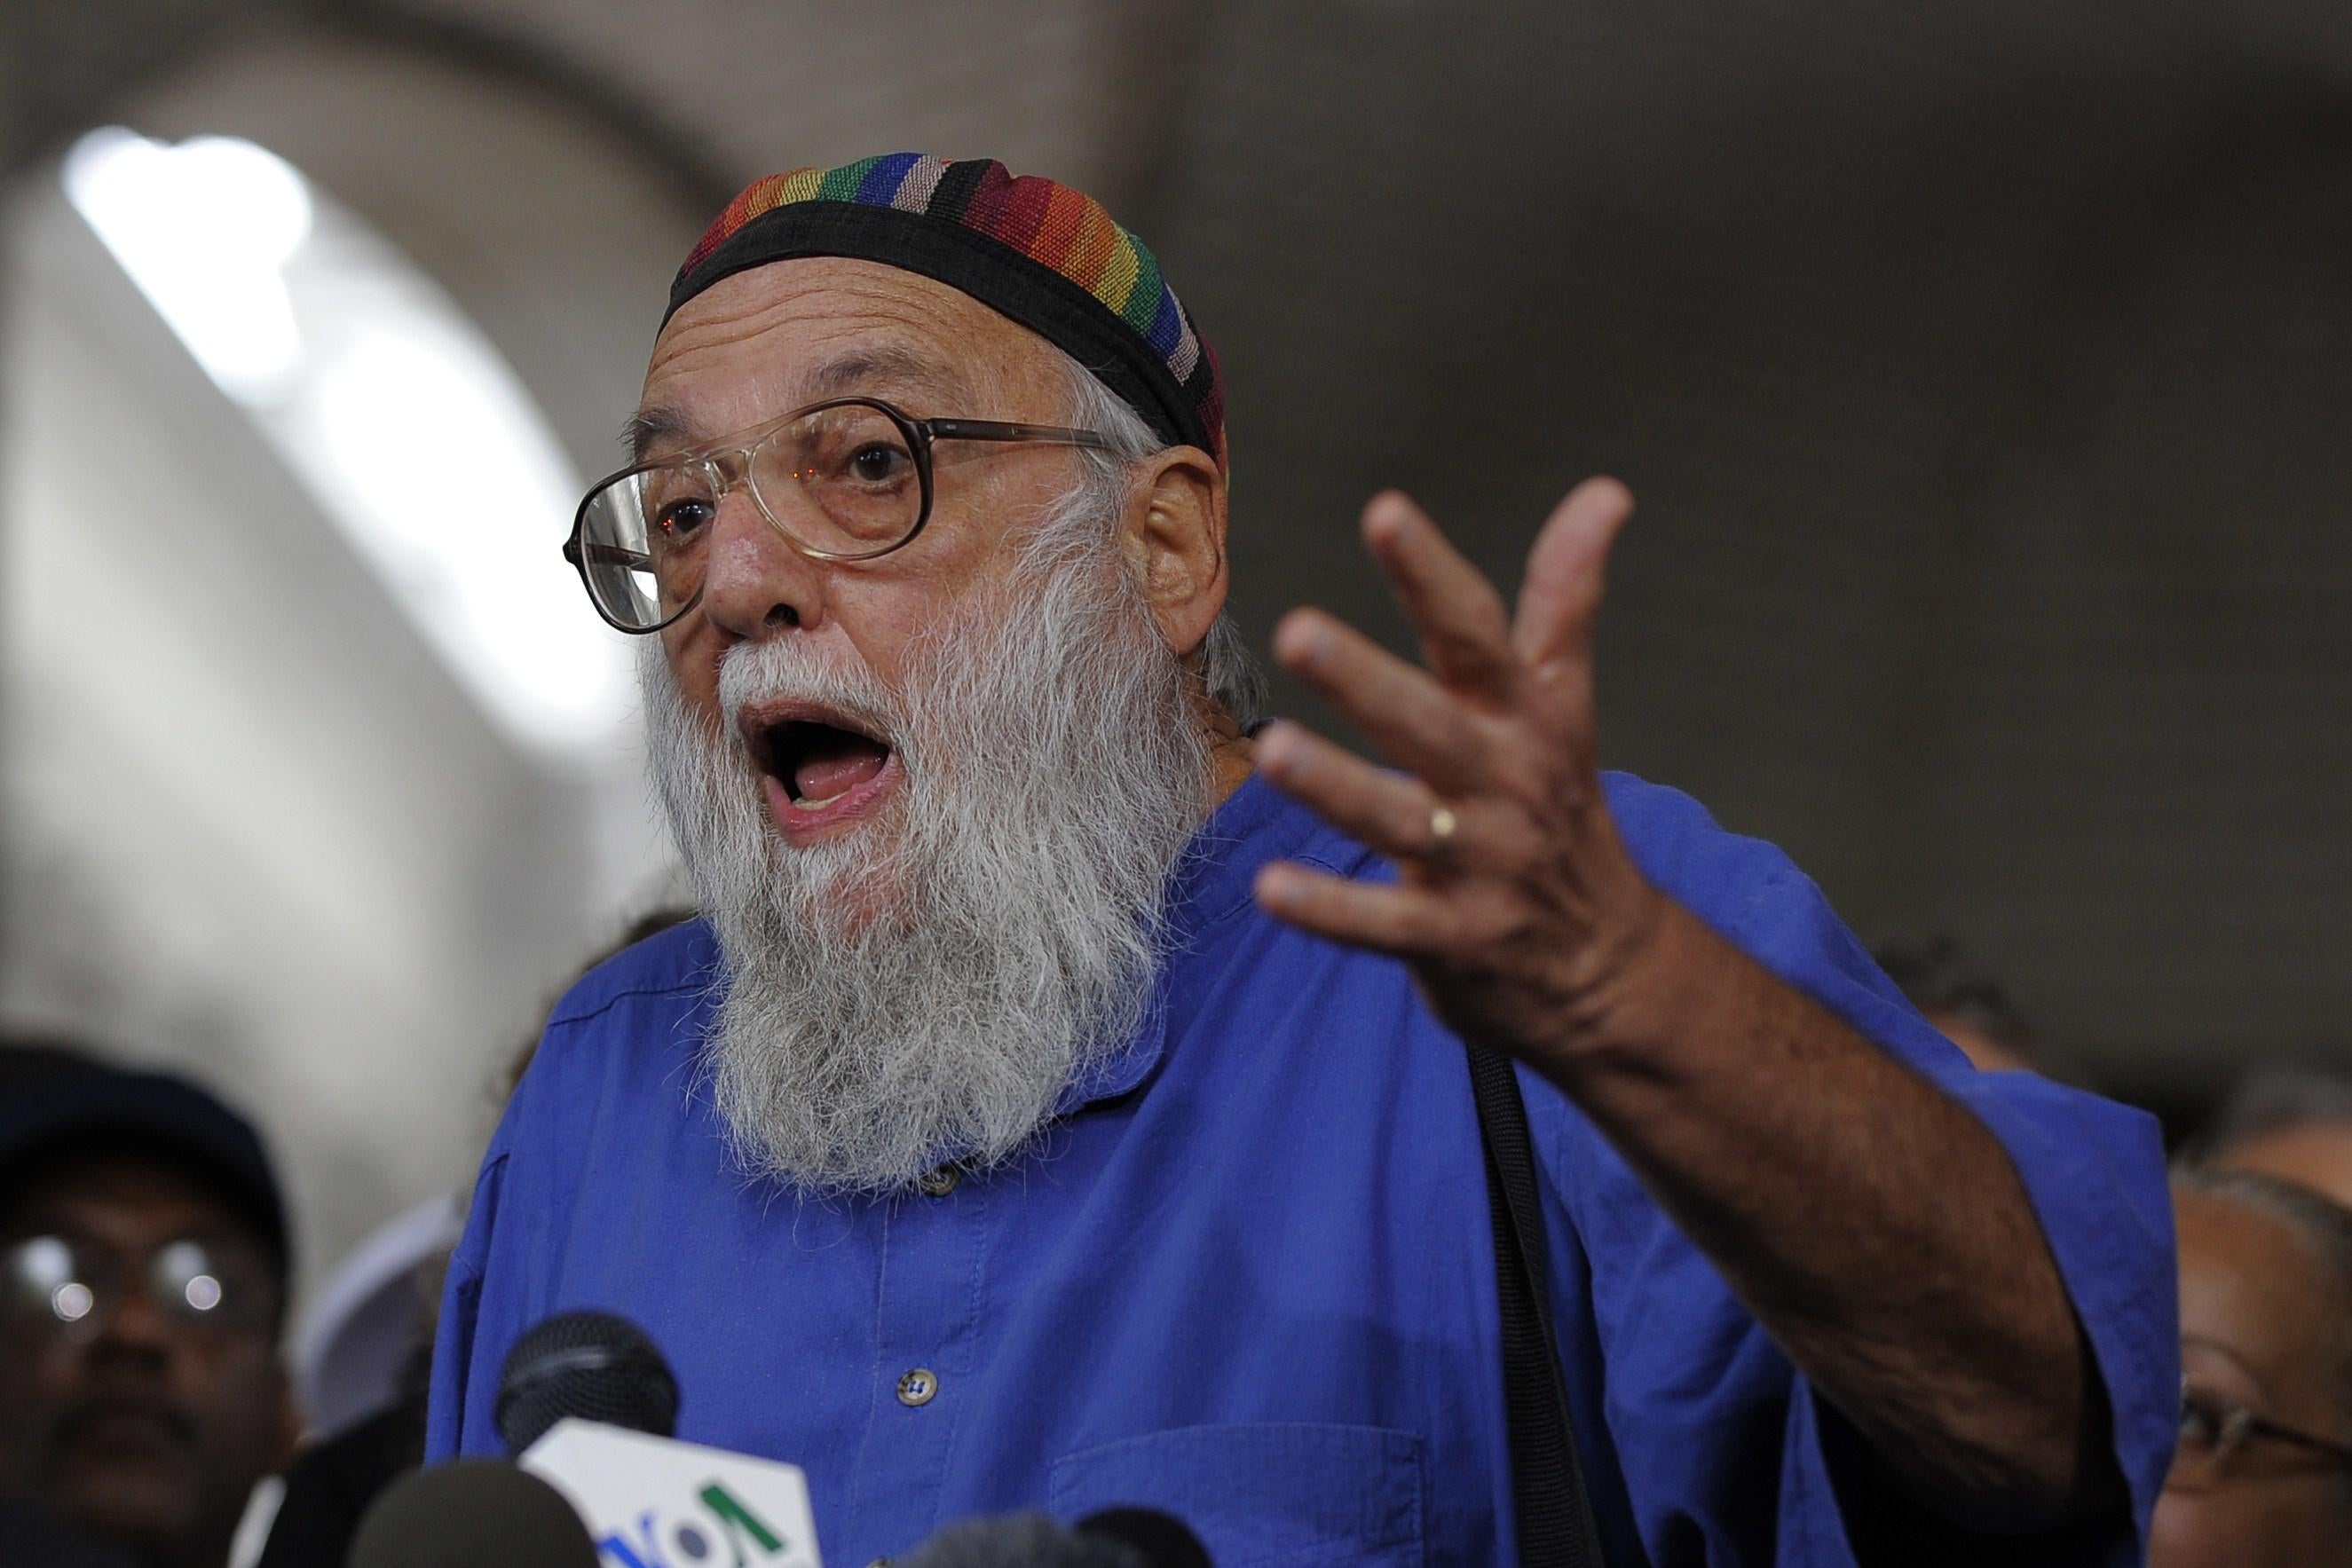 Rabbi Arthur Waskow of the Shalom Center (L) joins representatives of over 40 groups as they express support for allowing a Muslim cultural center to be built near ground zero during a news conference in Lower Manhattan on August 25, 2010.